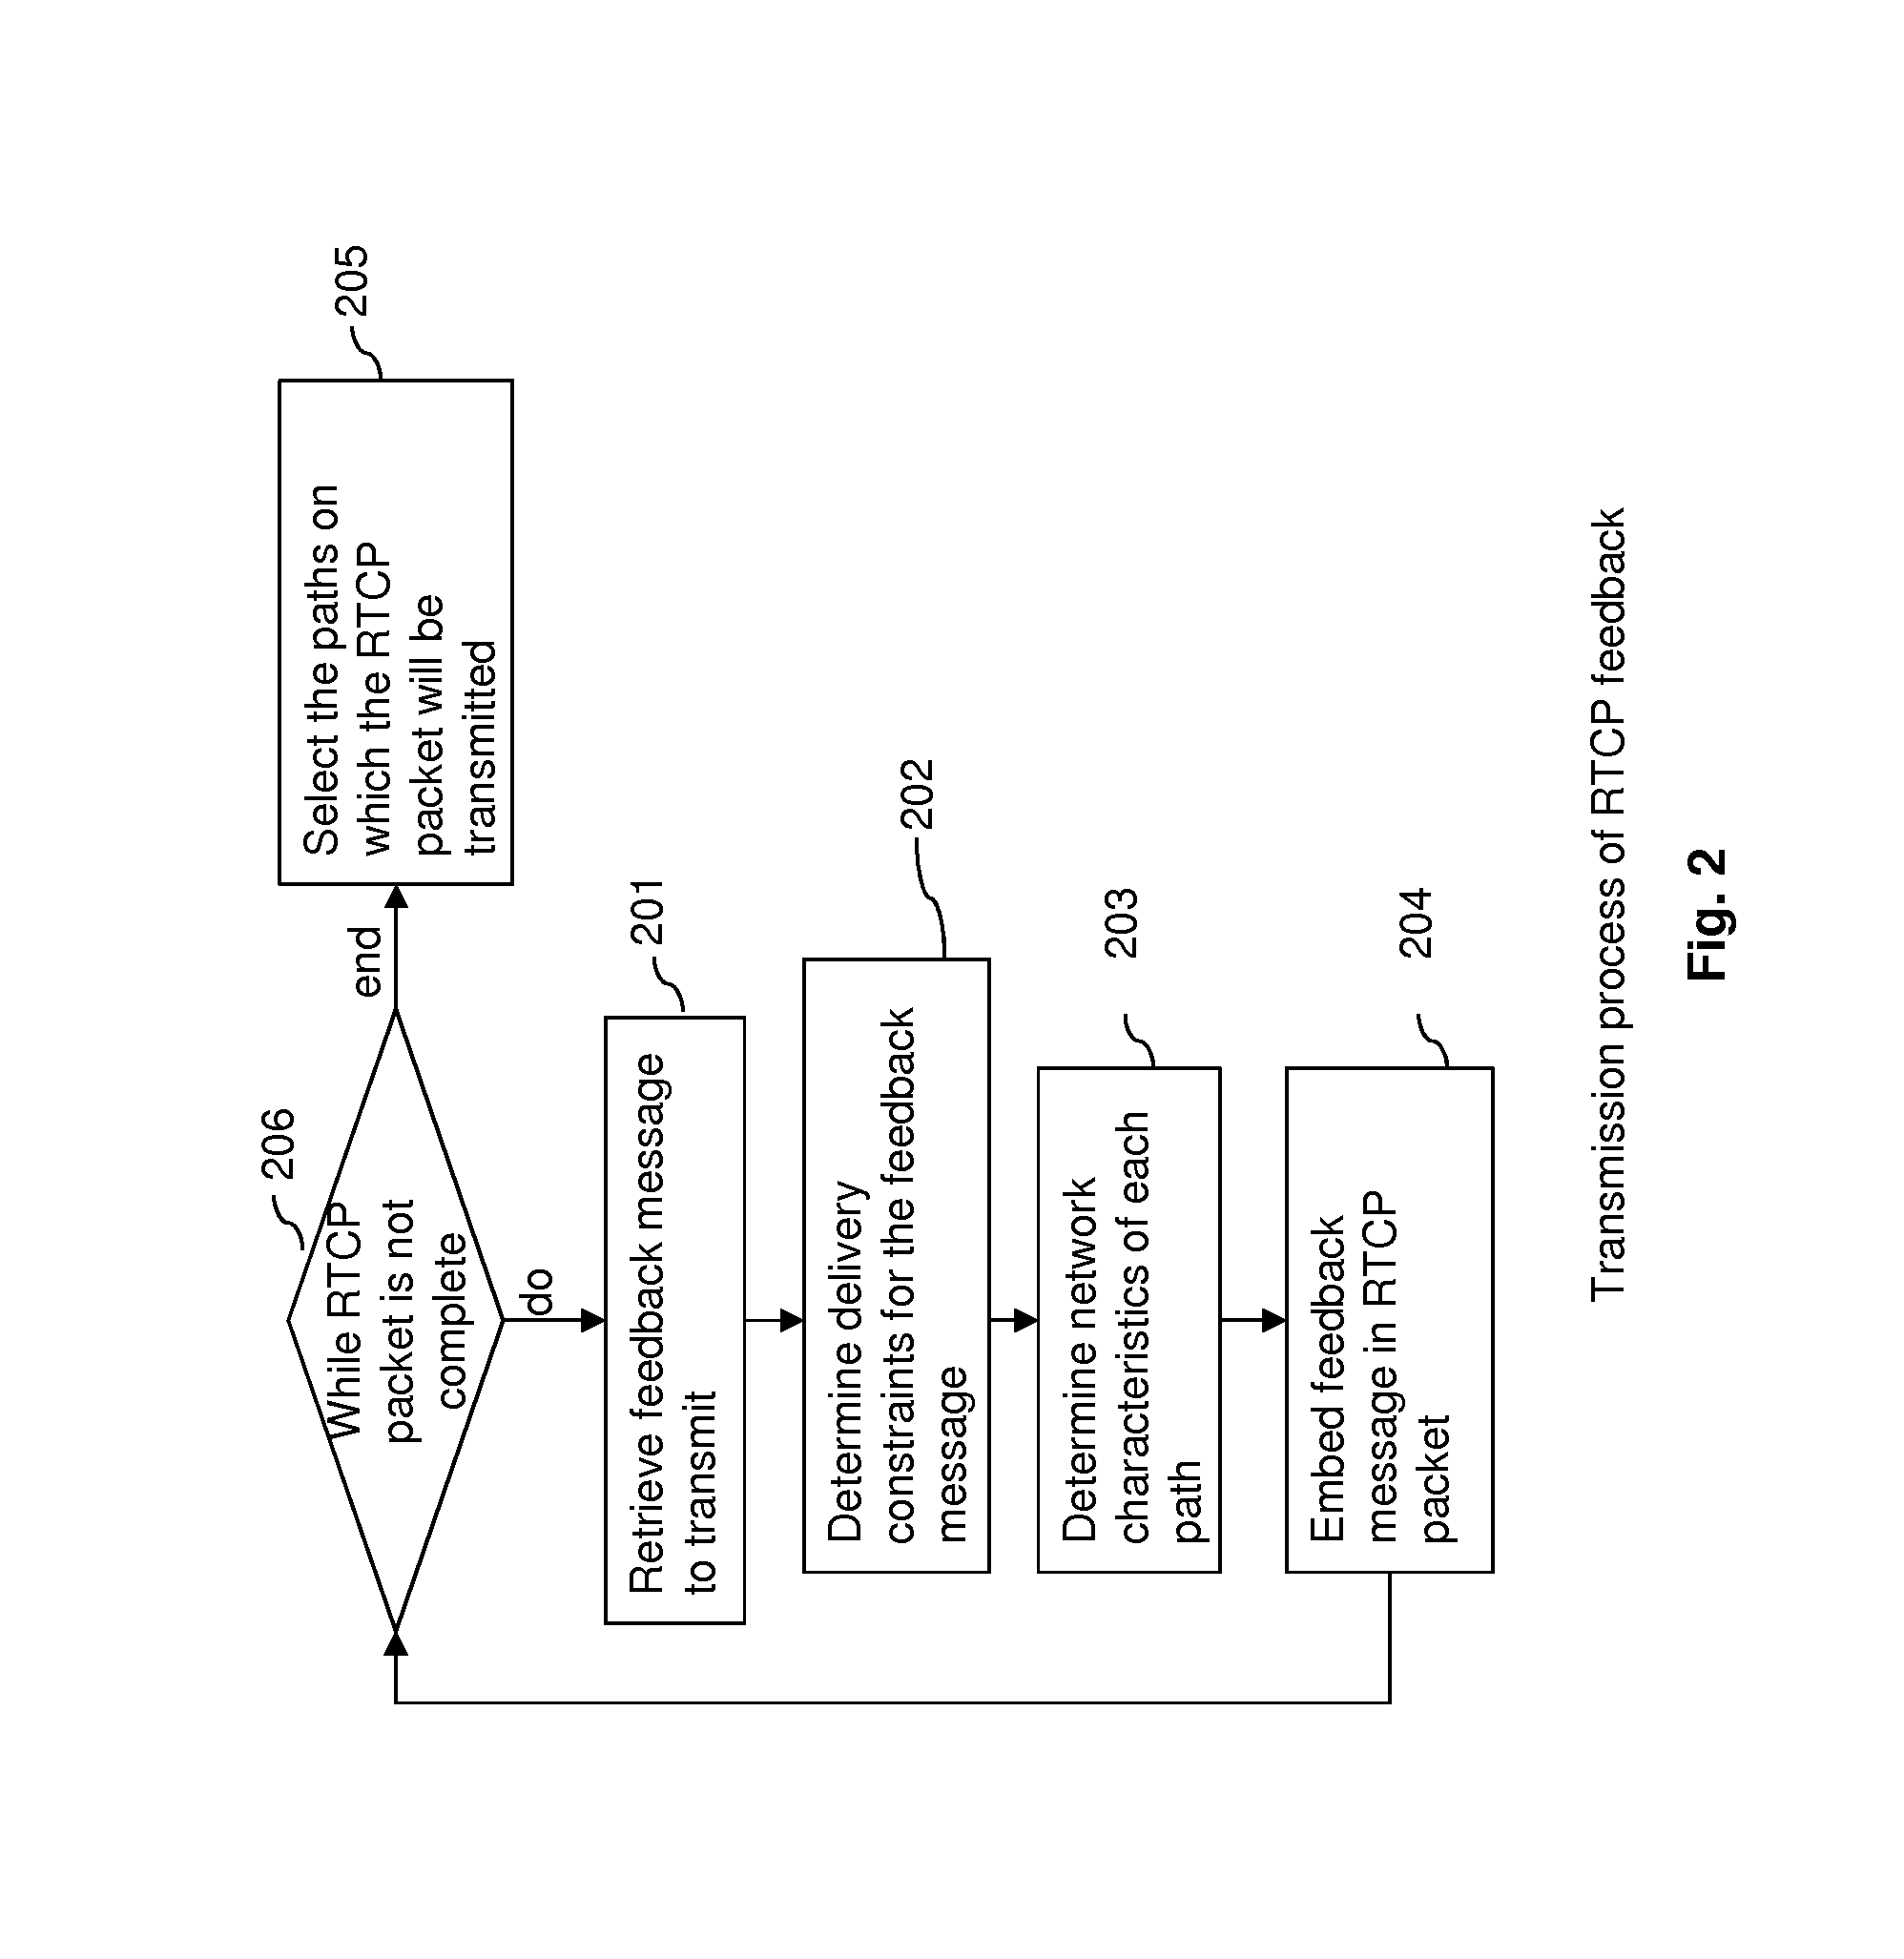 Feedback management in a multipath communication network